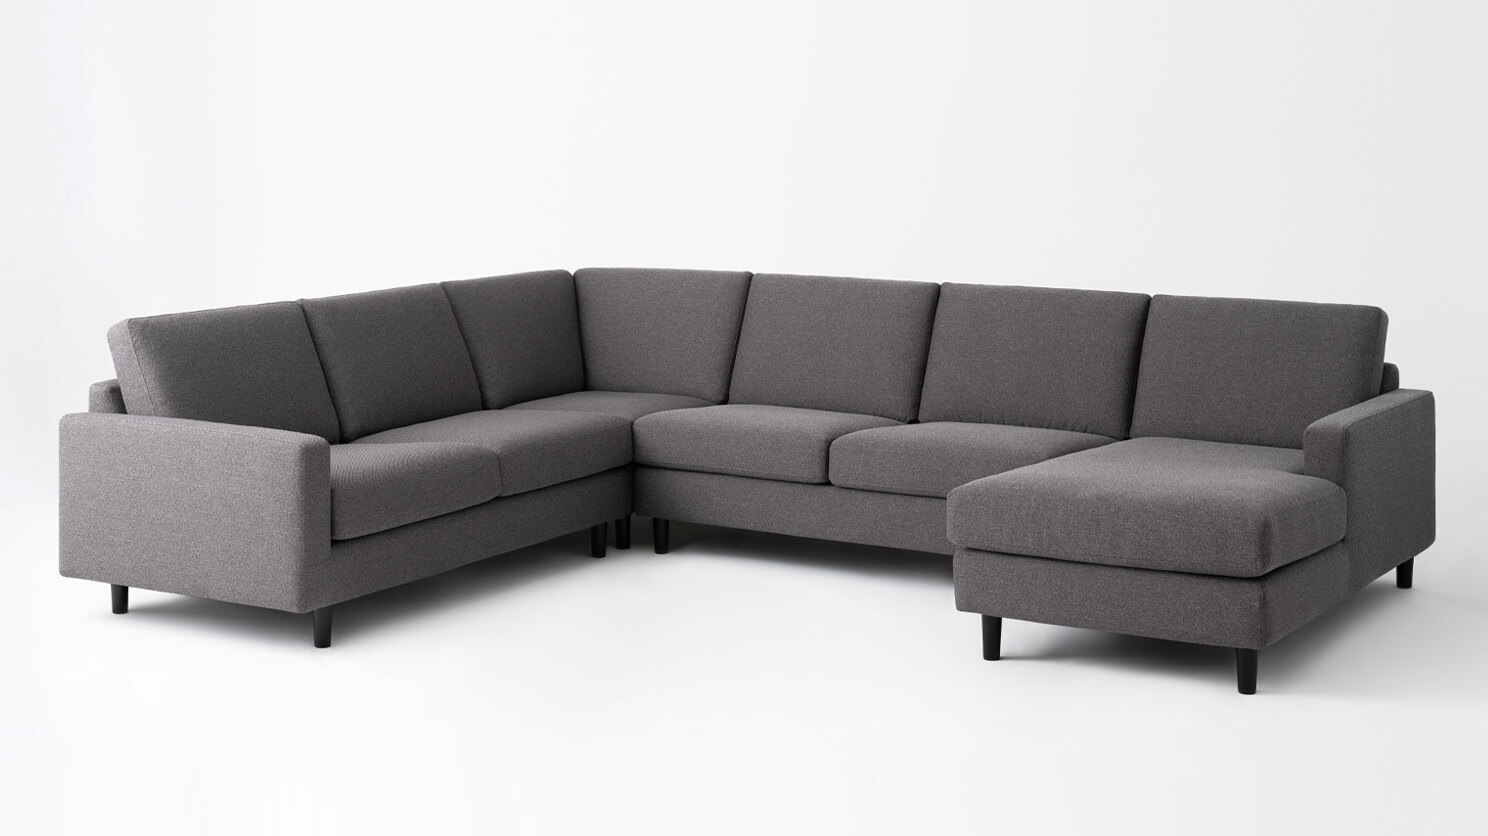 4 Piece Sectional Sofa With Chaise | Review Home Co